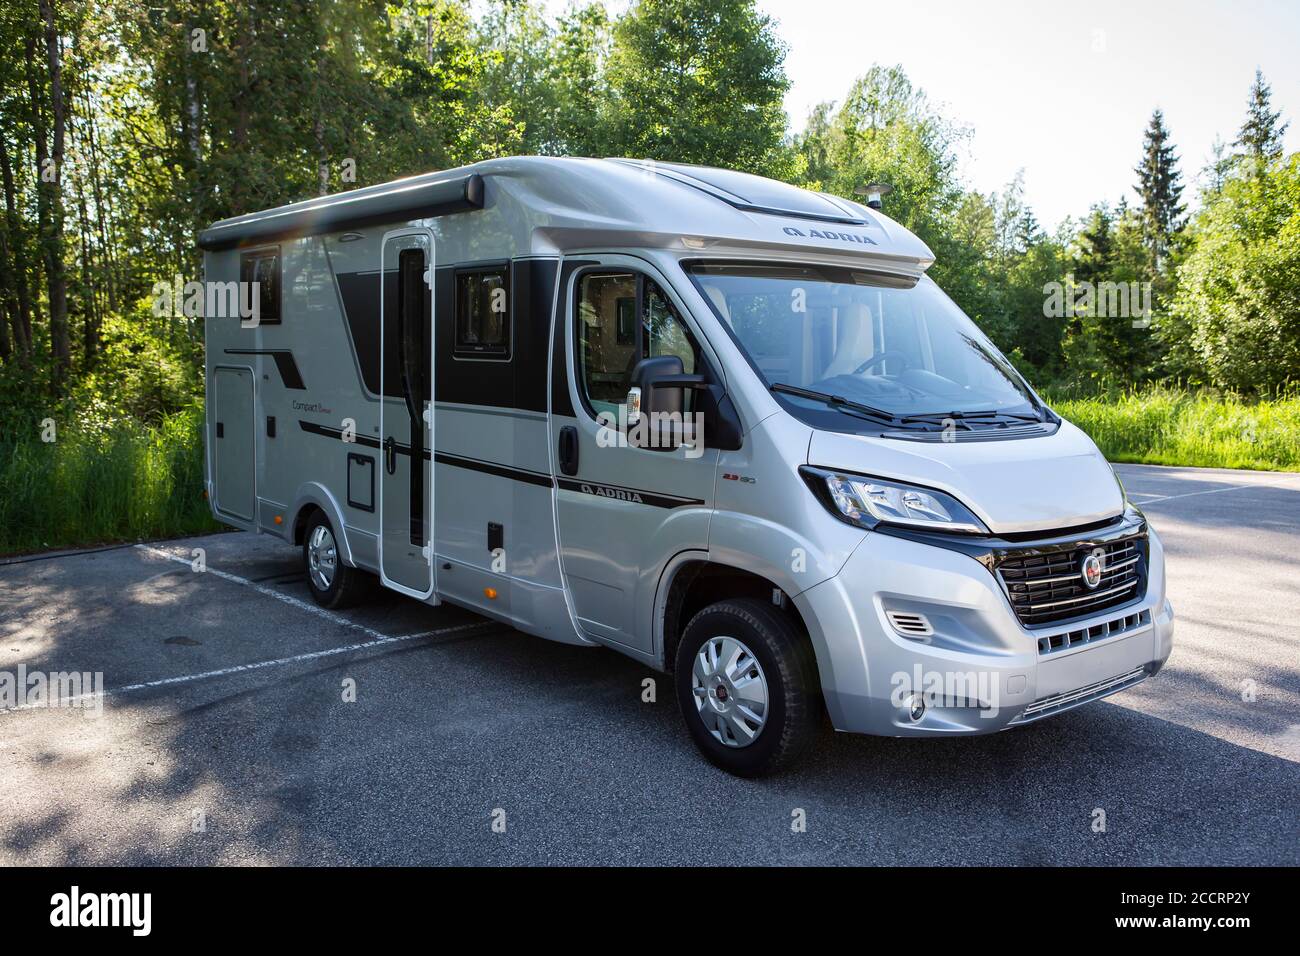 HINDAS, WEDENS - JUNE 13, 2019: The Adria motorhome is a popular camping car produced in Slovenia. This is the model of 2020. Stock Photo